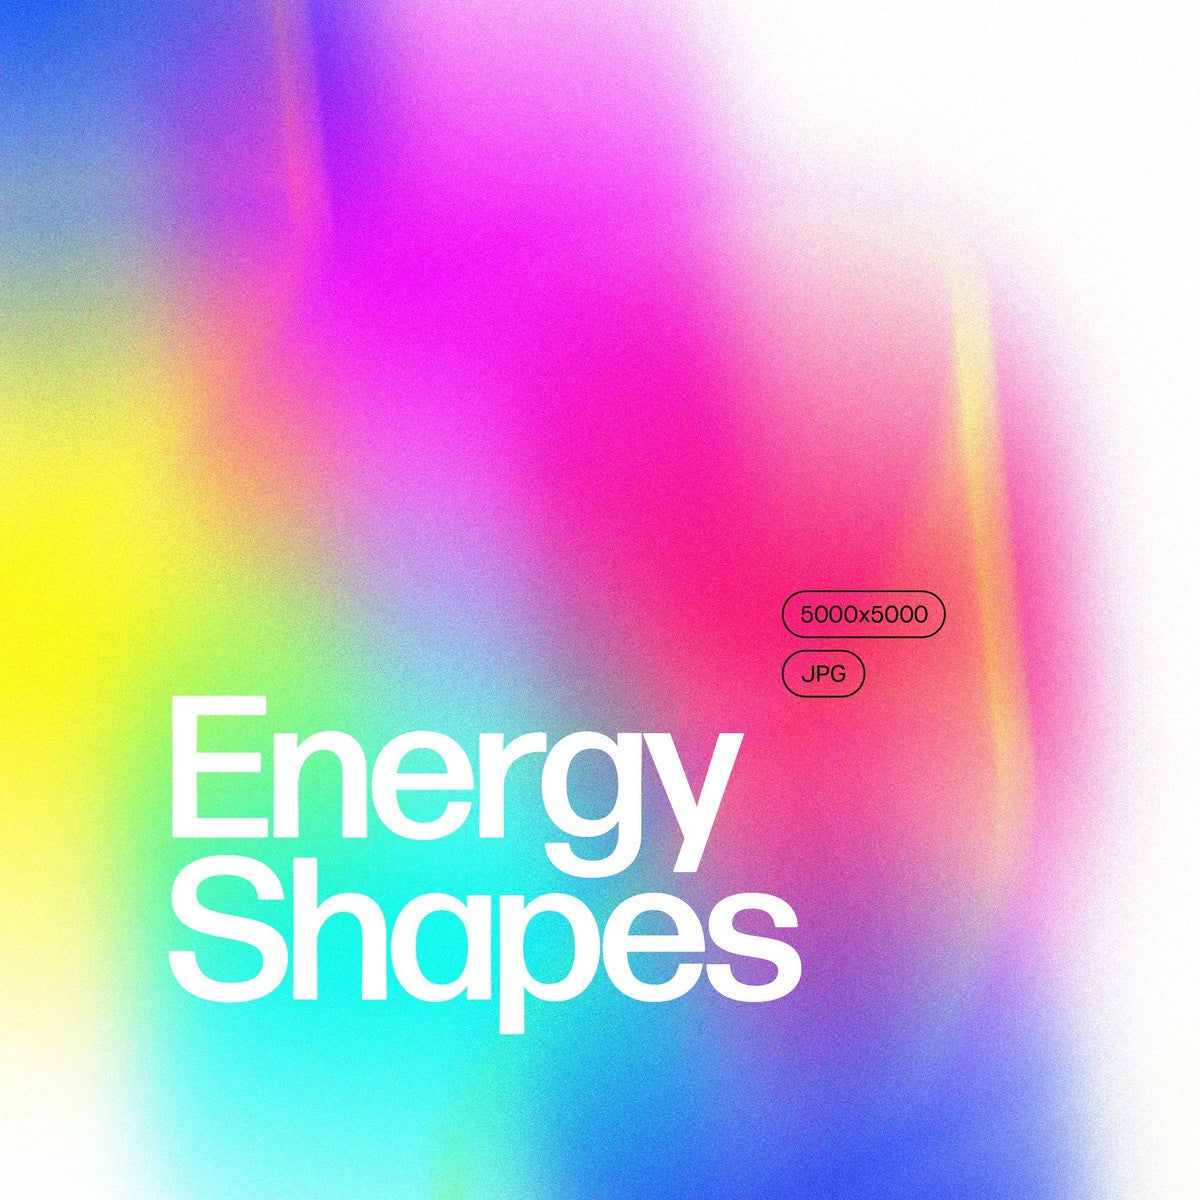 Energy Abstract Textures Pack